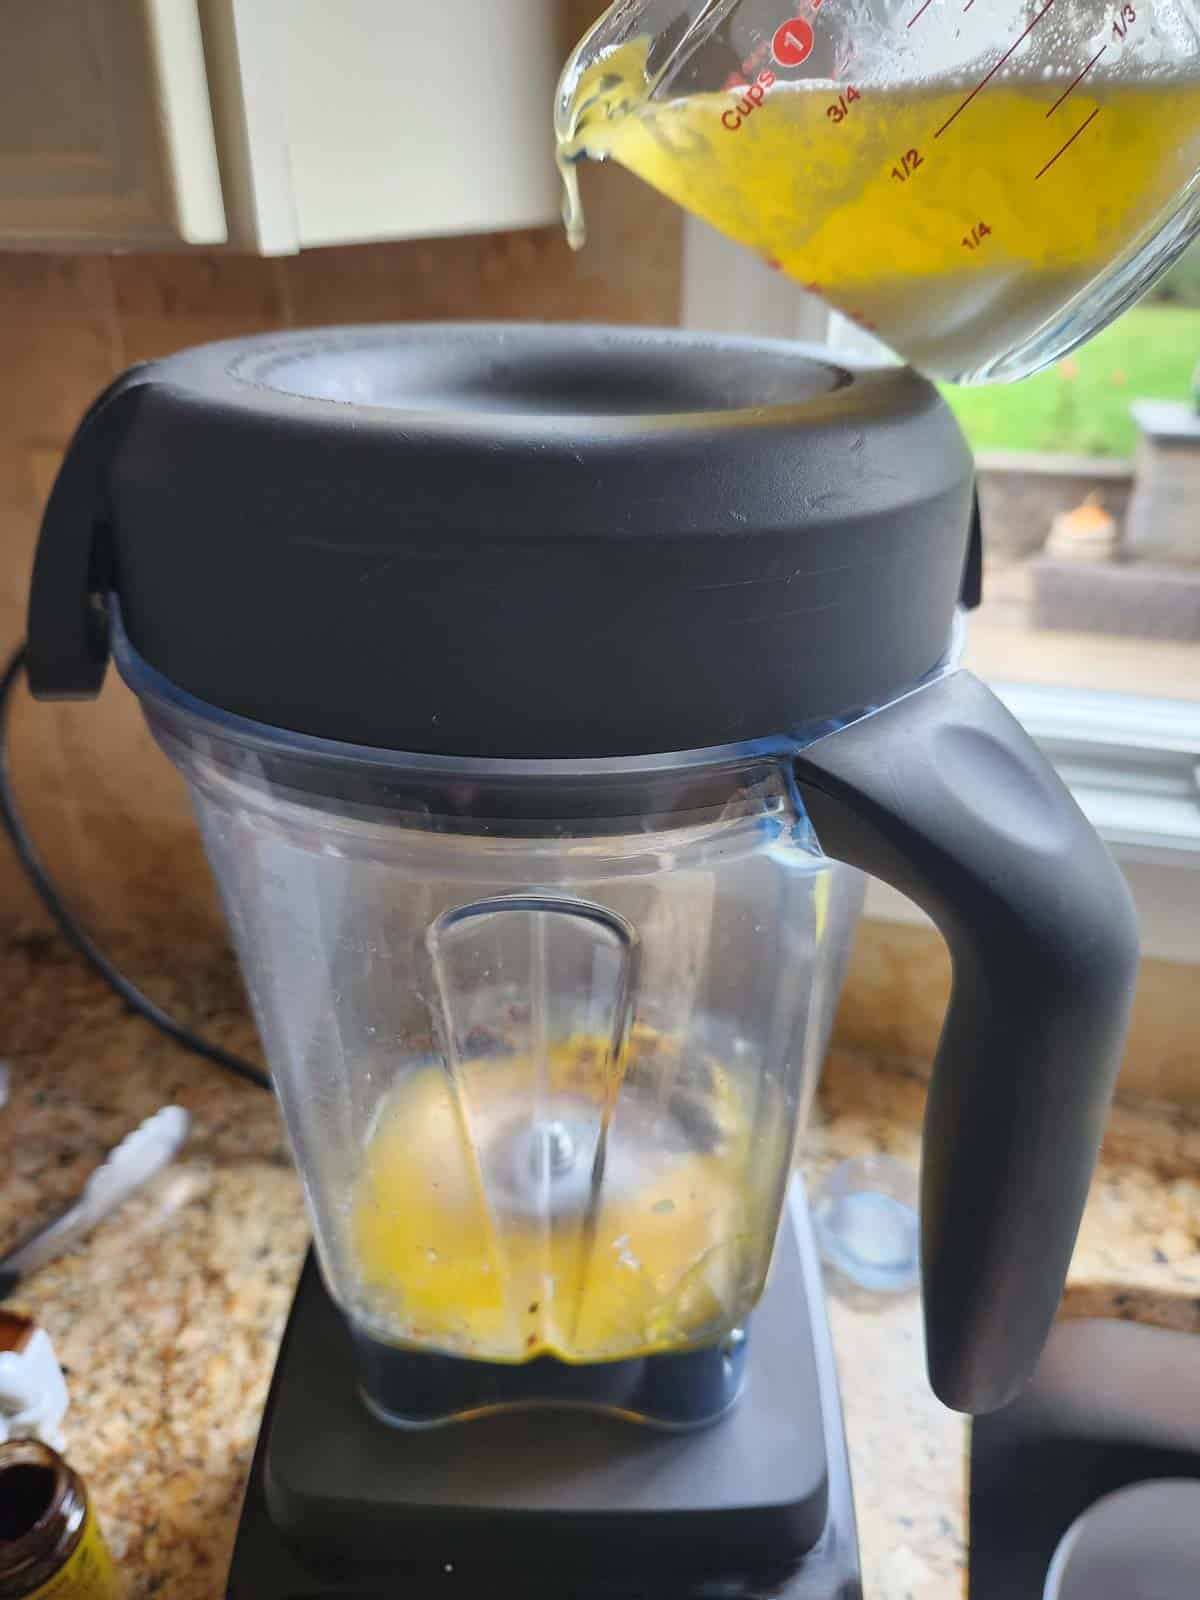 Butter is poured into a blender to make hollandaise sauce.